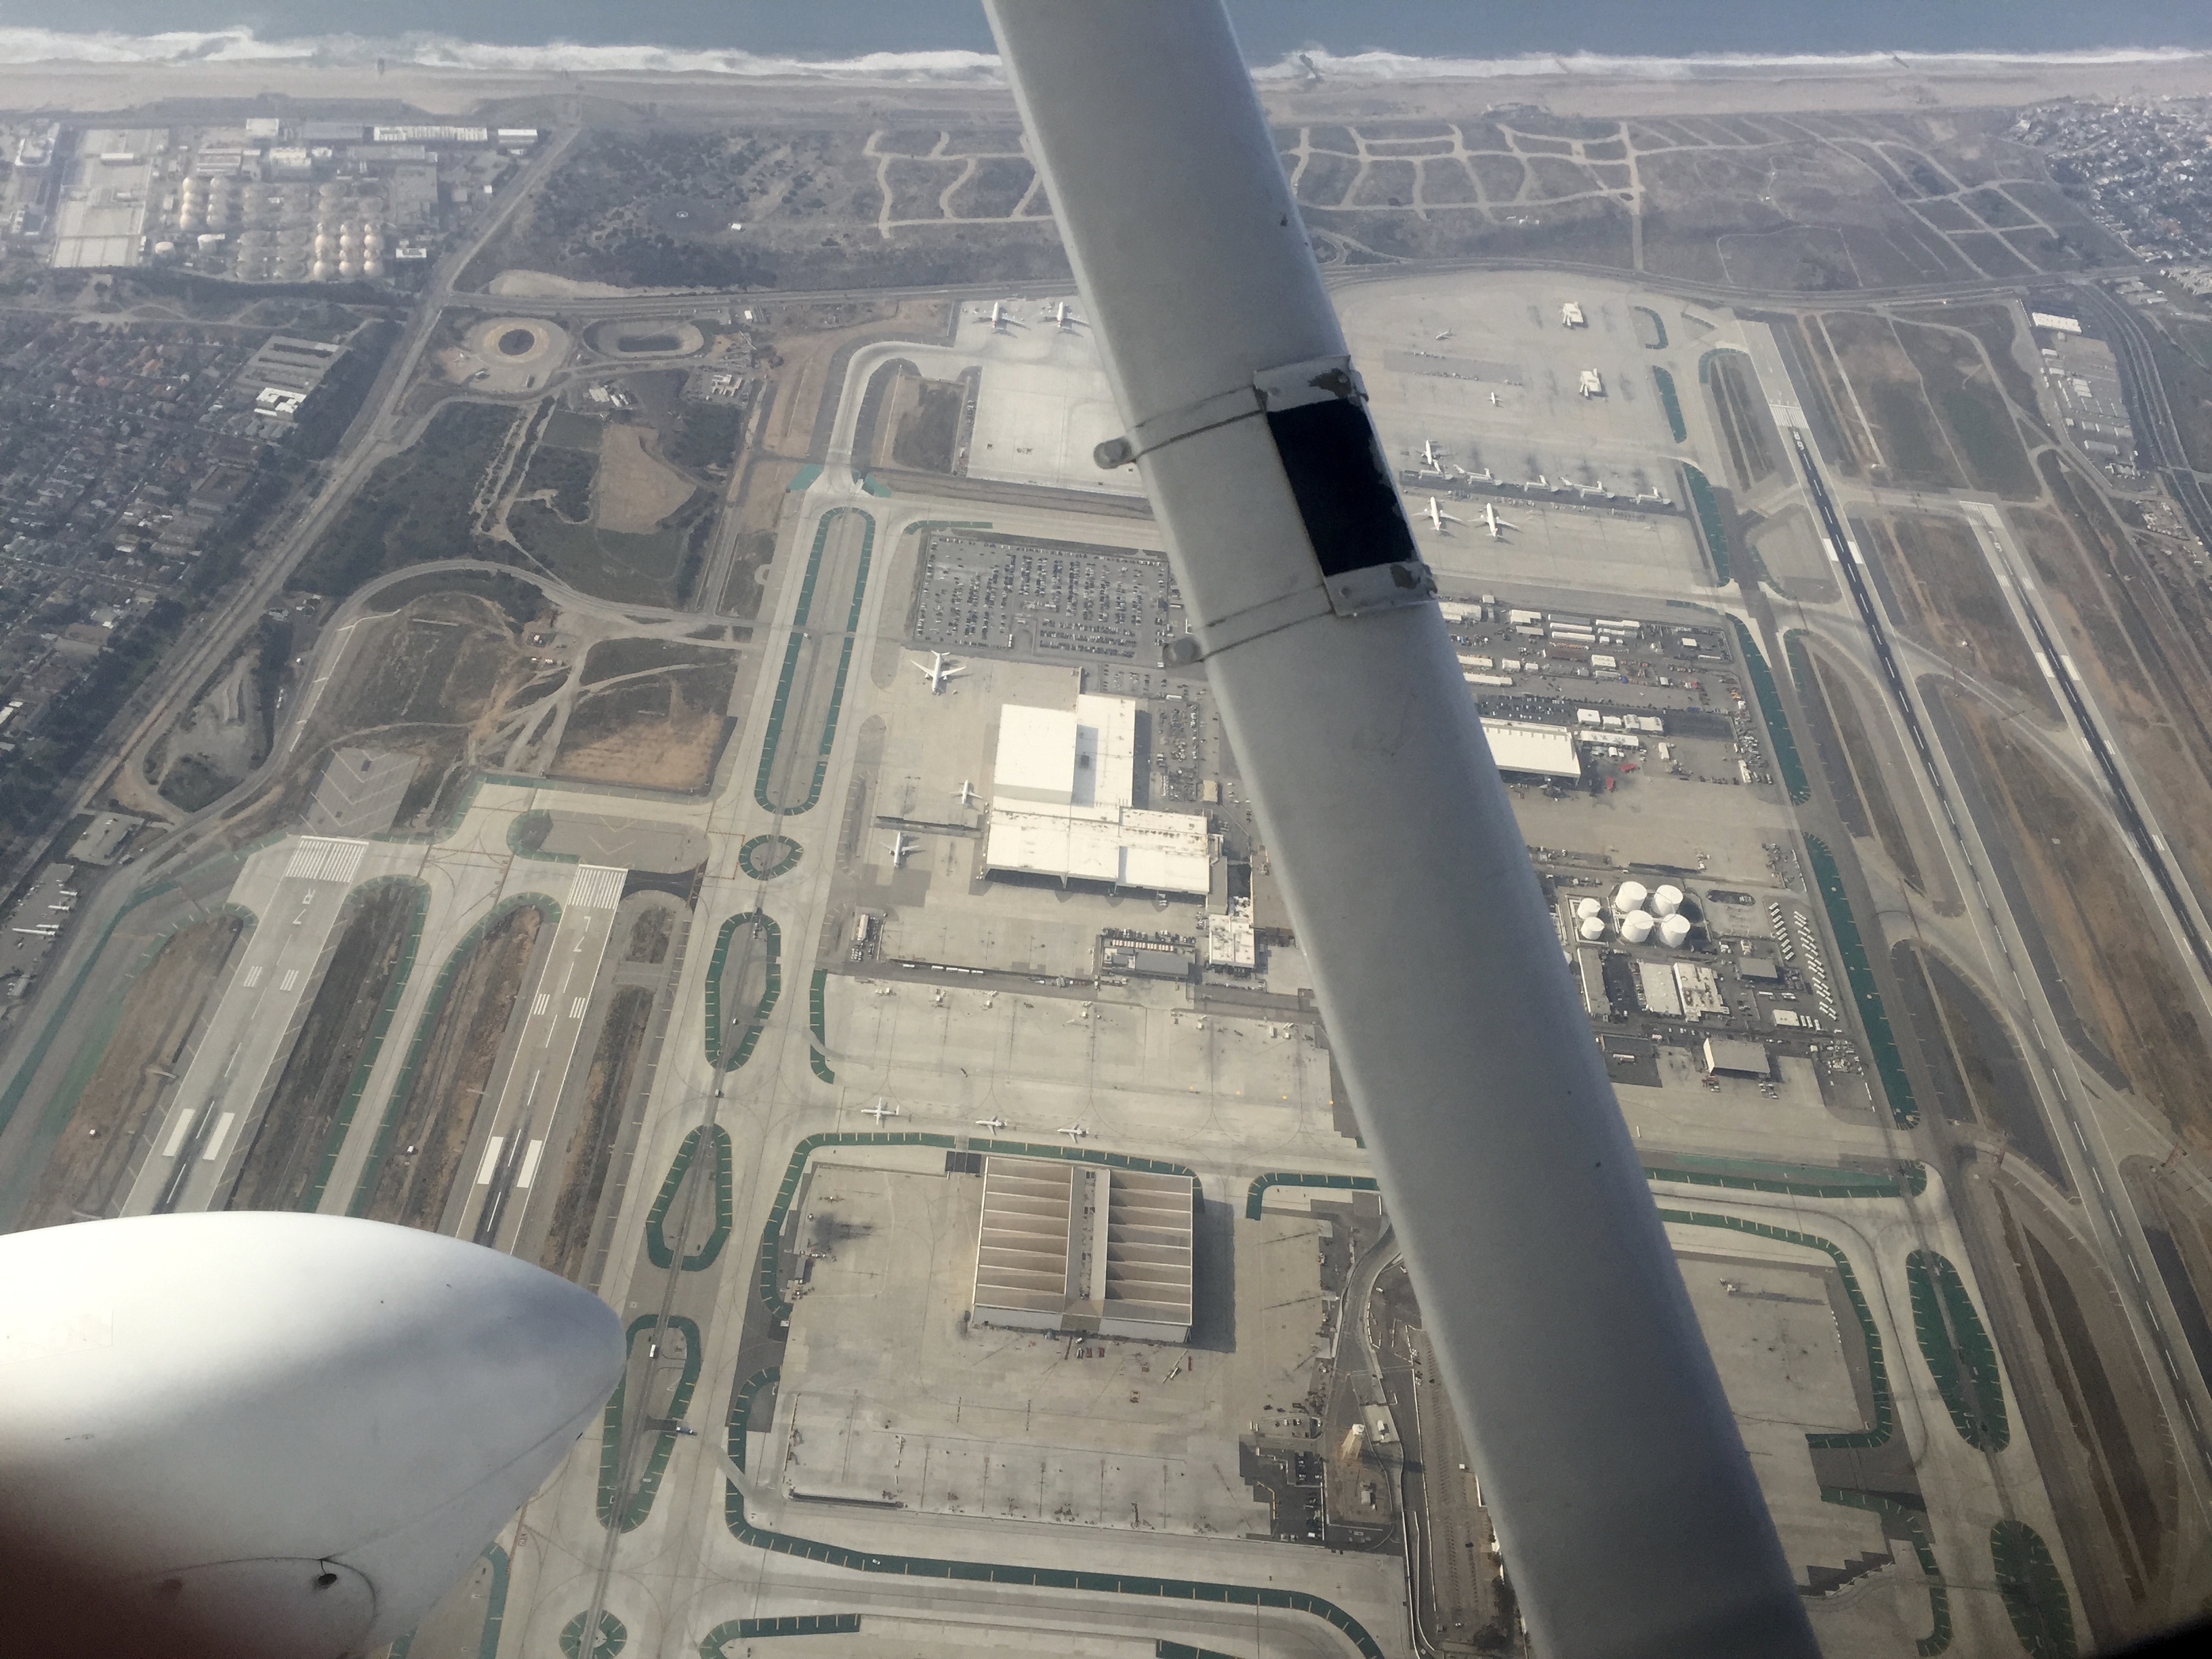 Svend passing LAX at the special VFR route.